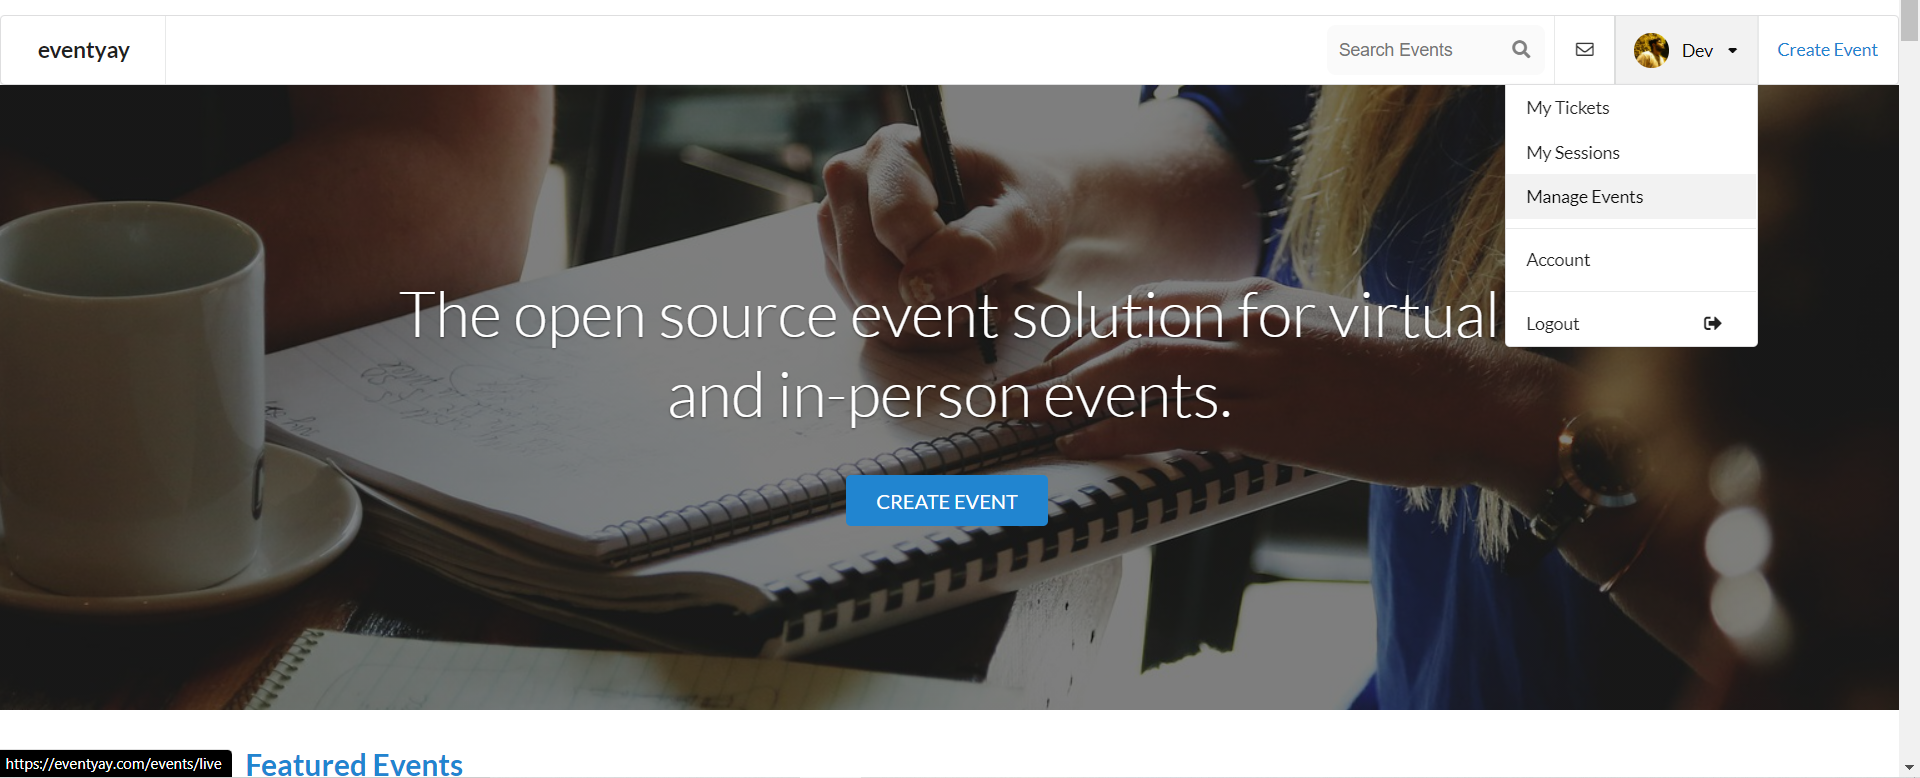 manage events